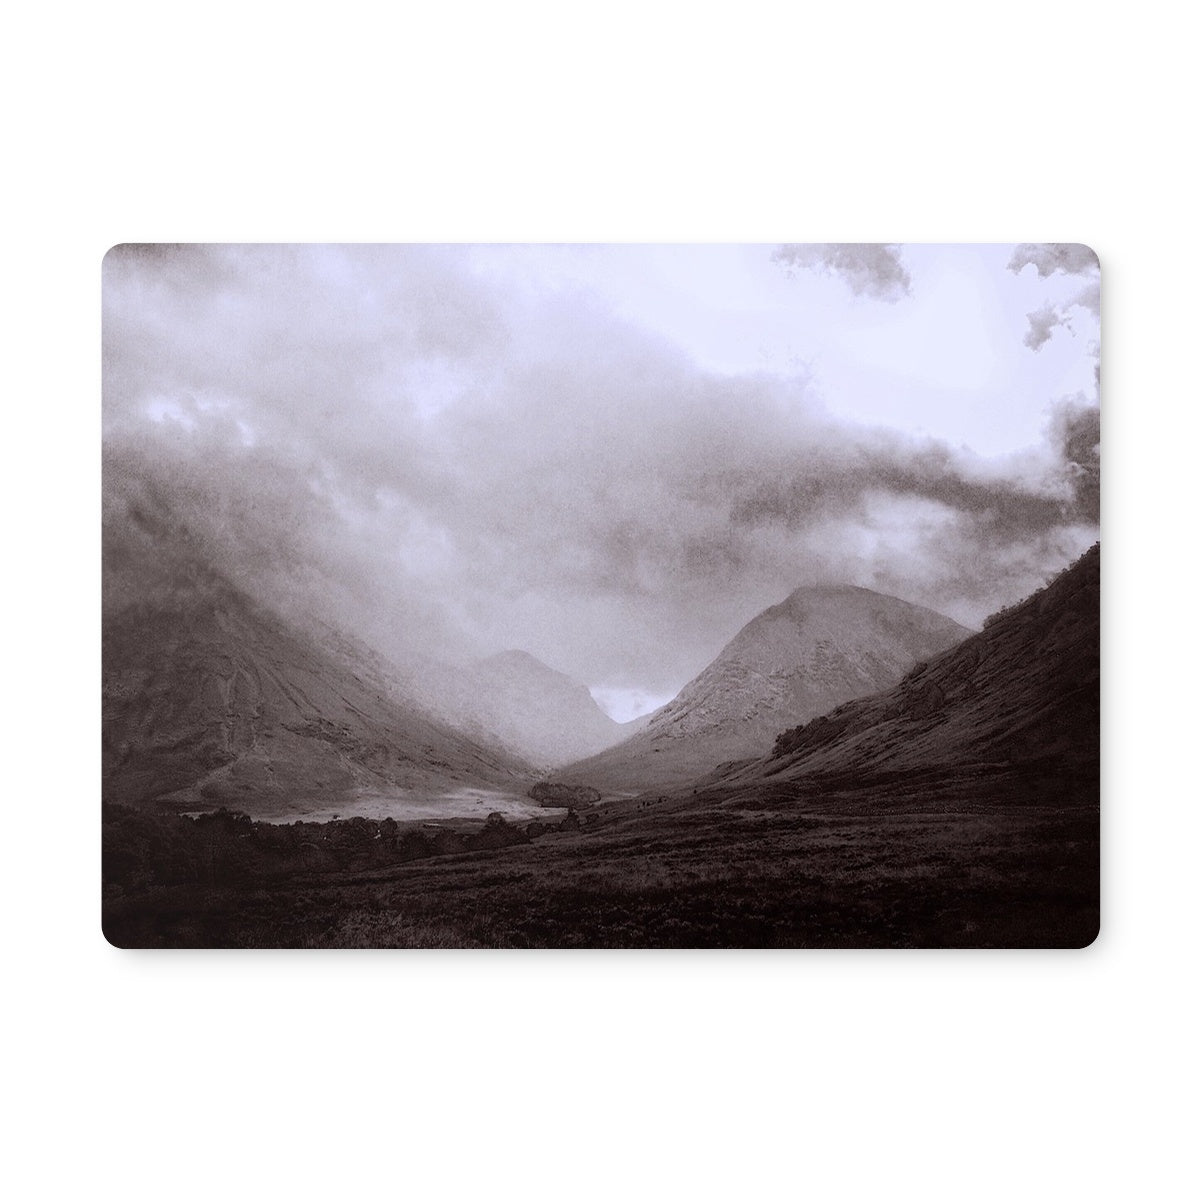 Glencoe Mist Art Gifts Placemat-Placemats-Glencoe Art Gallery-6 Placemats-Paintings, Prints, Homeware, Art Gifts From Scotland By Scottish Artist Kevin Hunter